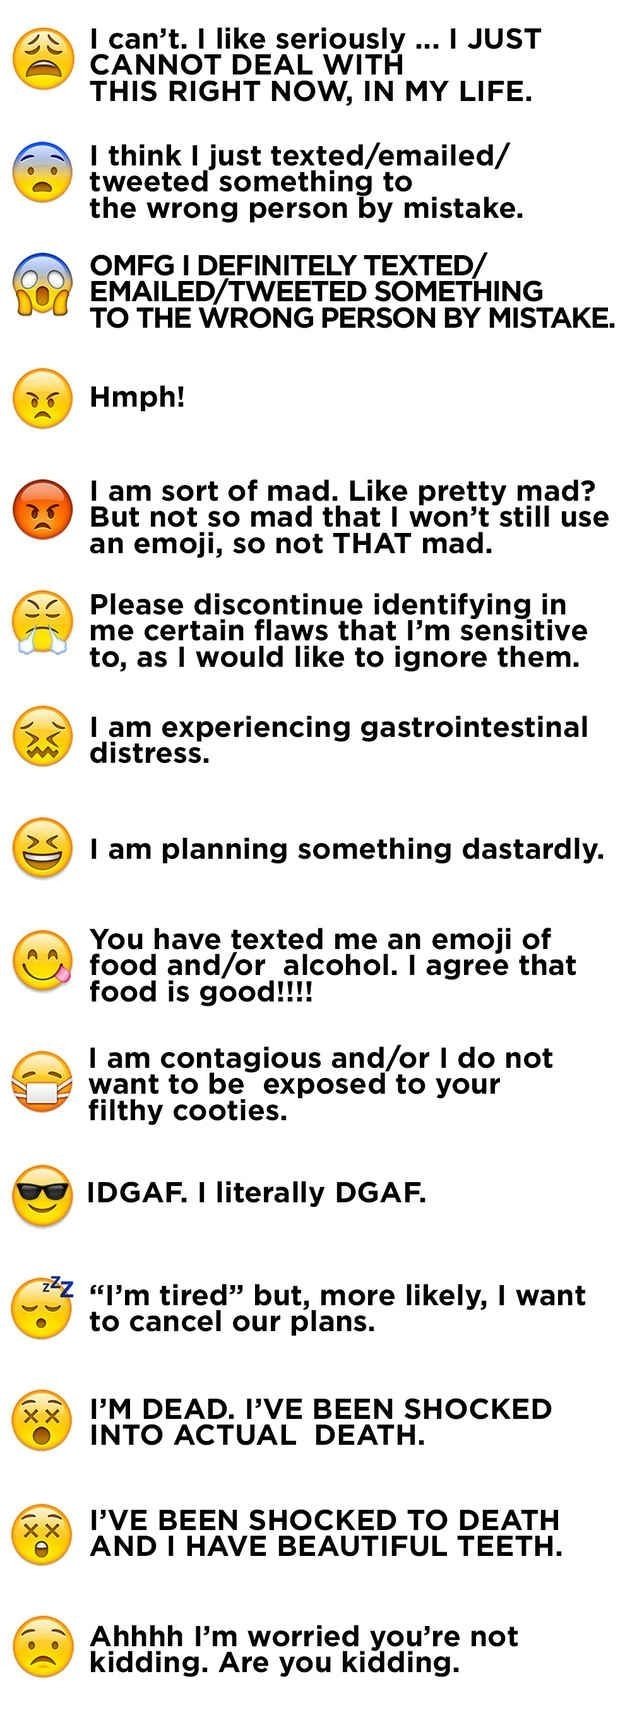 10 Lovely Crazy Ideas To Do With Friends 9 best emoji images on pinterest funny stuff jokes and the emoji 2023